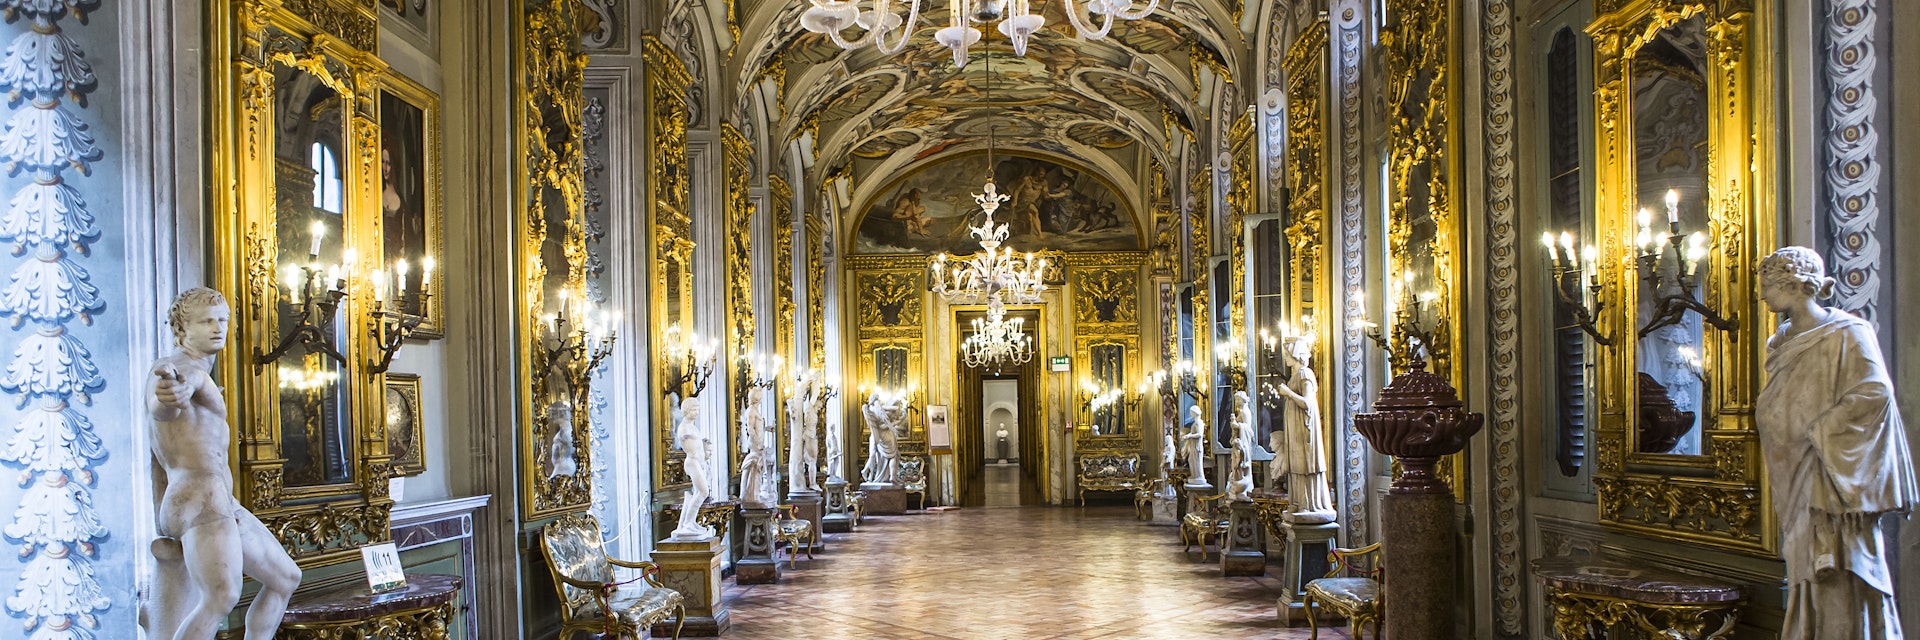 ROME, ITALY, JUNE 14, 2015 : interiors and architectural details of Doria Pamphilj Gallery, june 14, 2015, in Rome, Italy; Shutterstock ID 310592036; Your name (First / Last): Josh Vogel; Project no. or GL code: 56530; Network activity no. or Cost Centre: Online-Design; Product or Project: 65050/7529/Josh Vogel/LP.com Destination Galleries